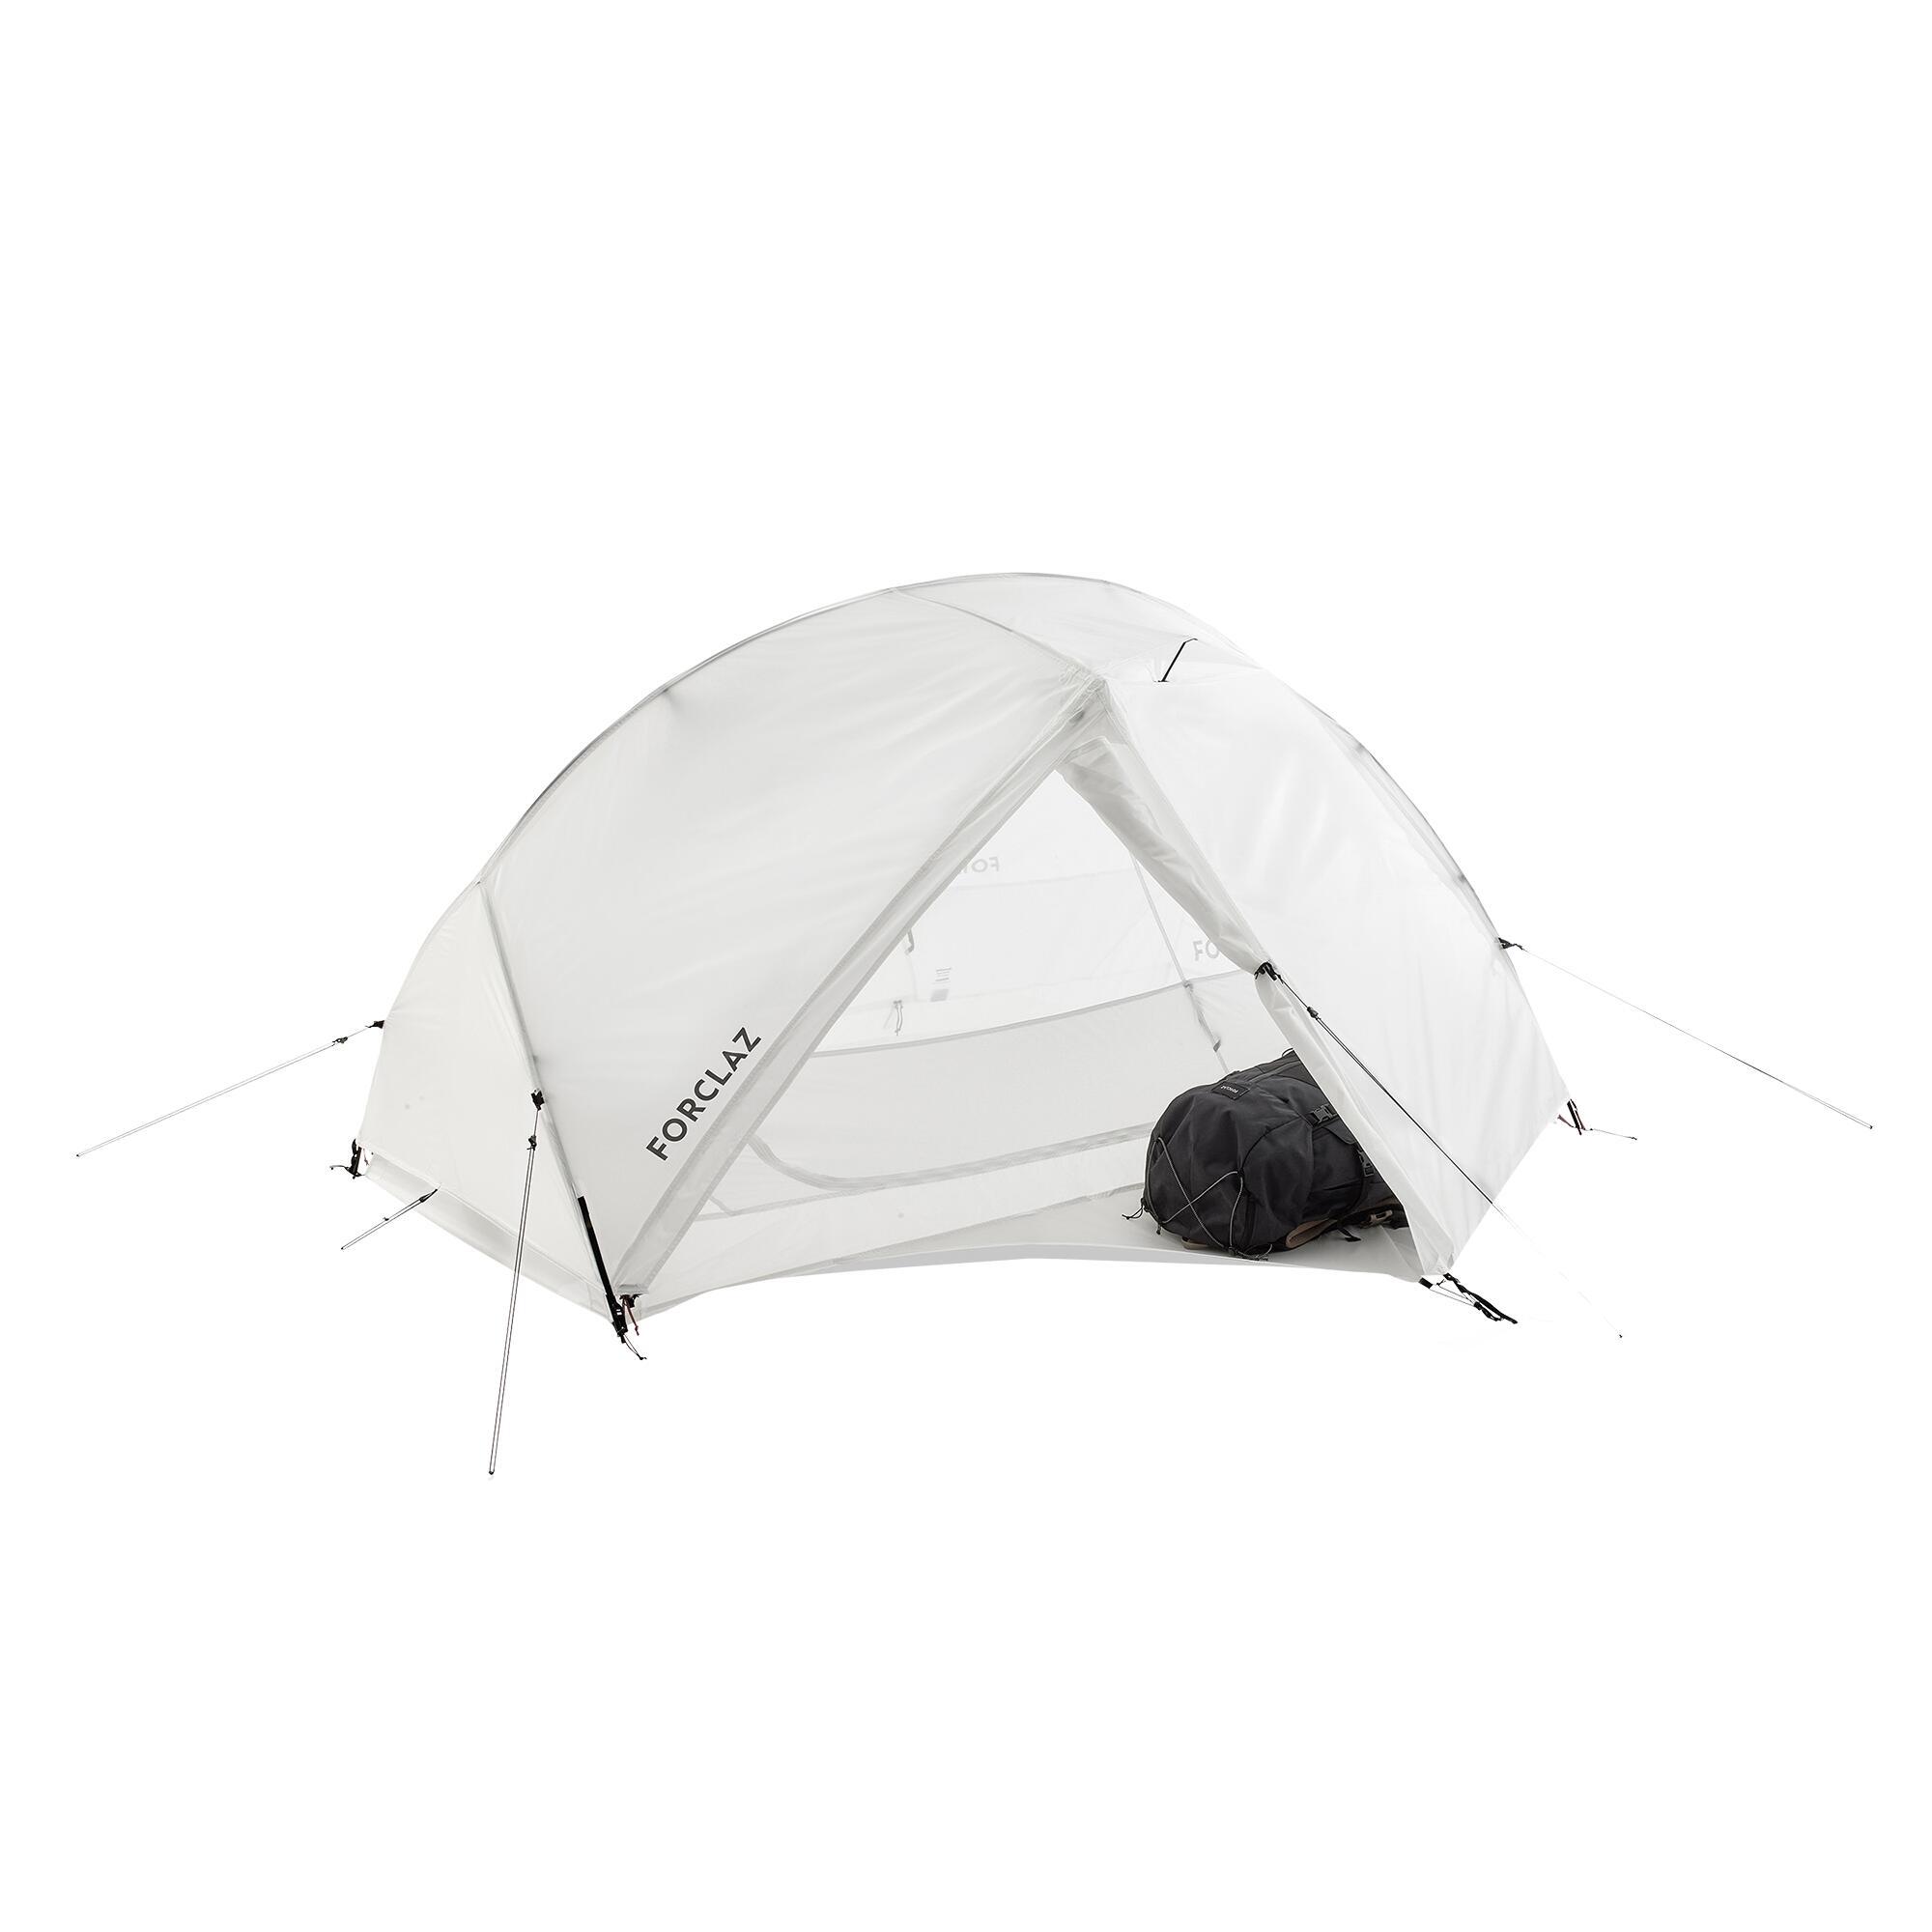 Trekking dome tent - 2-person - MT900 Minimal Editions 4/11